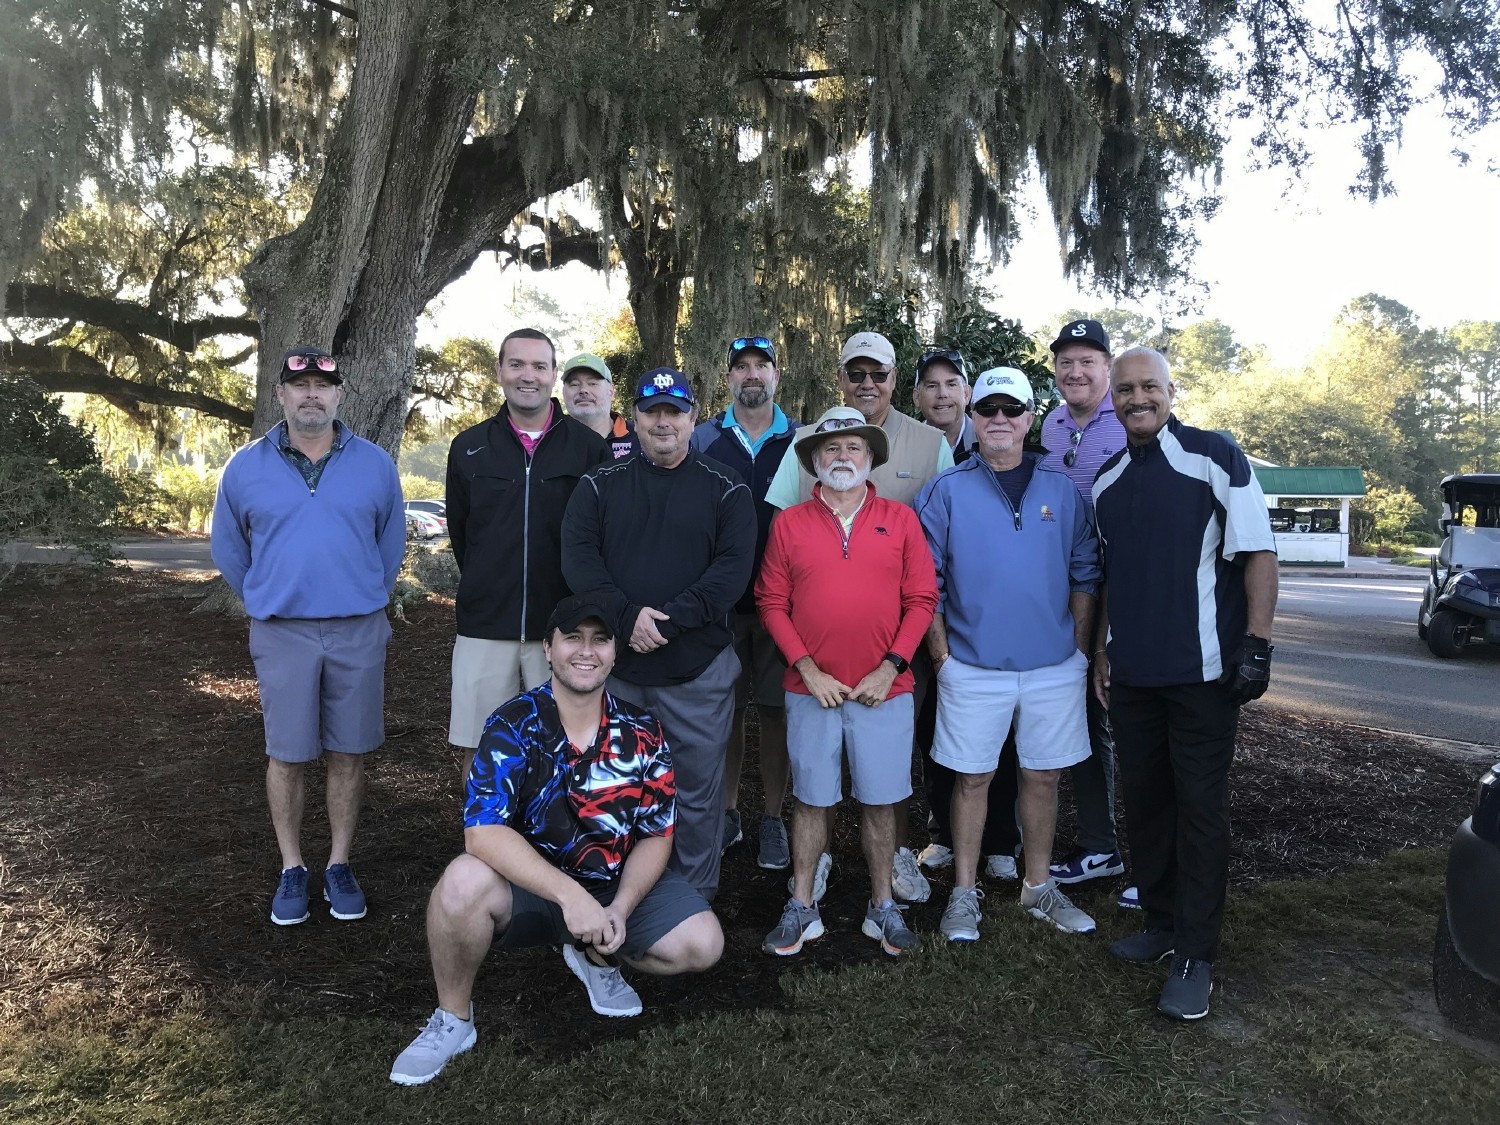 Team DLH golfing for a great cause!  DLH Charity Golf Tournament to benefit Friends of Fisher House in Charleston